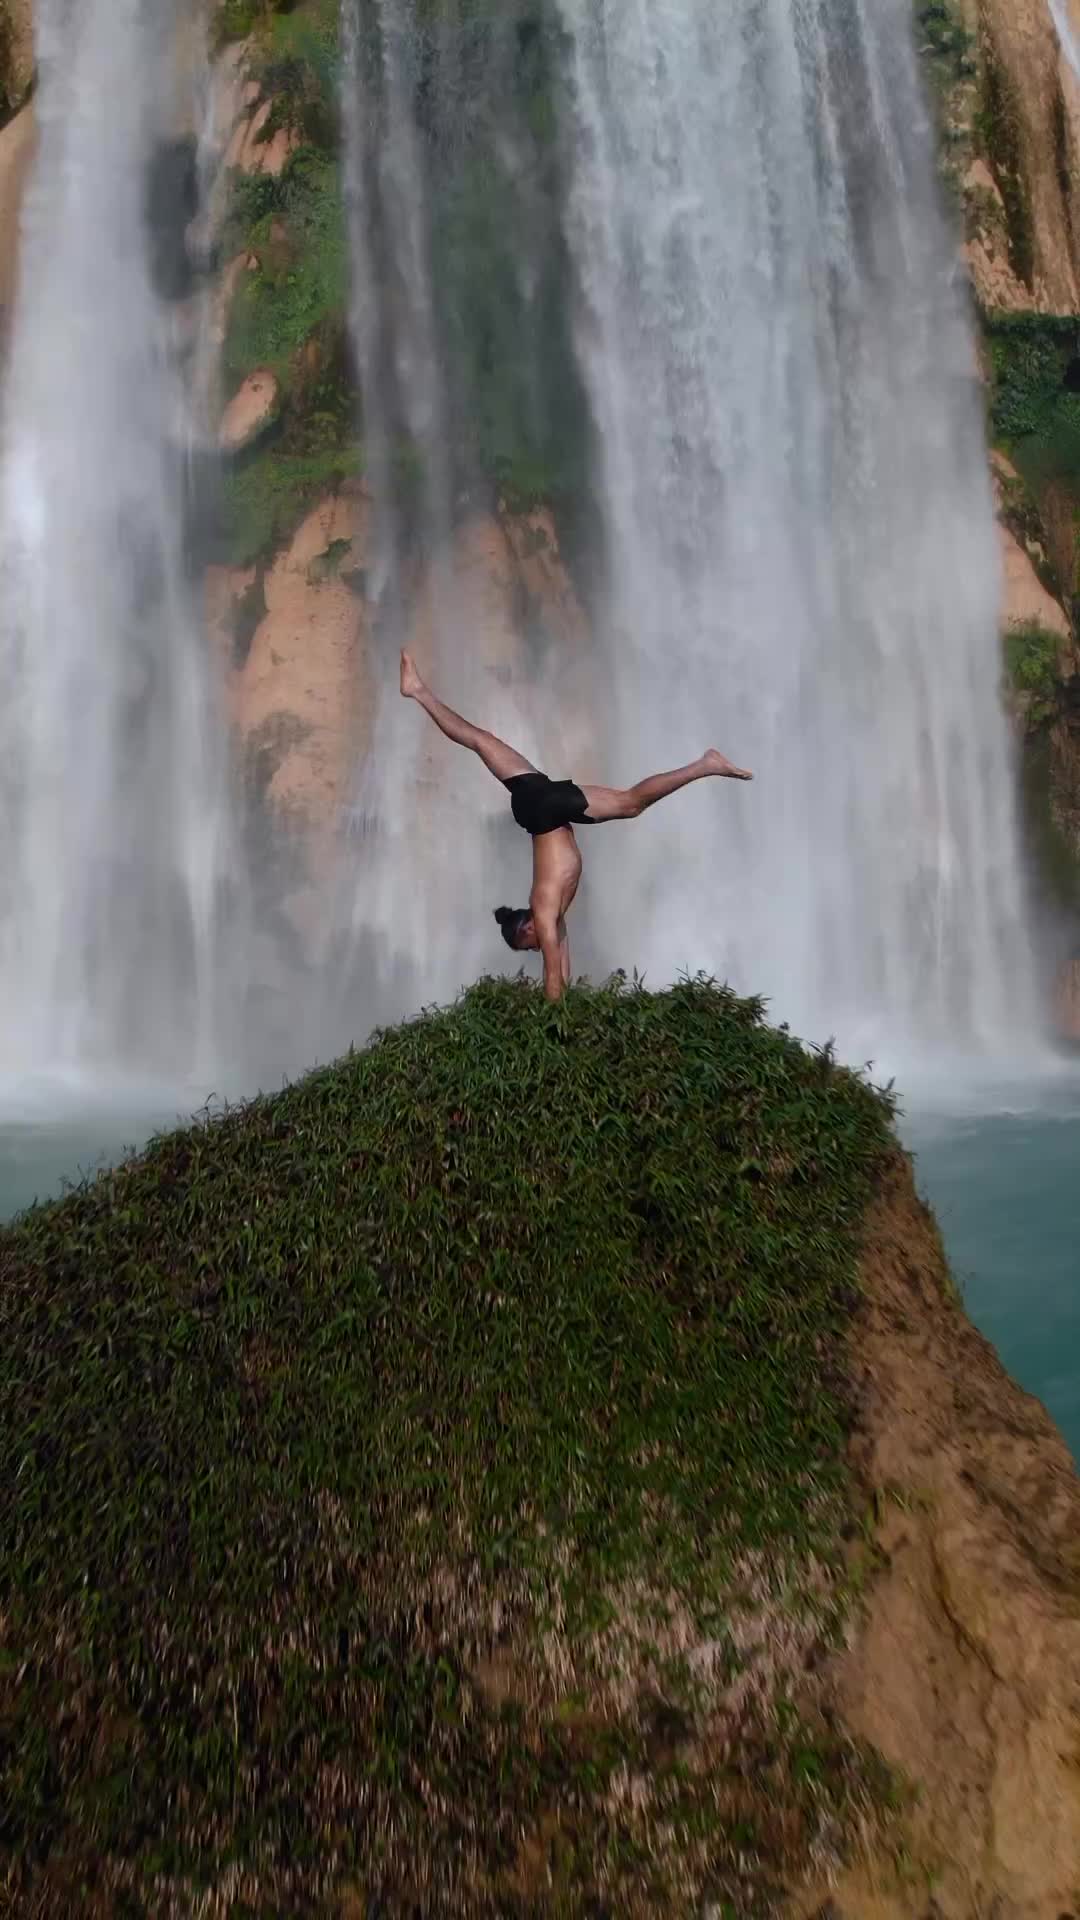 Surreal Waterfall Adventure in Chiapas, Mexico 🌊